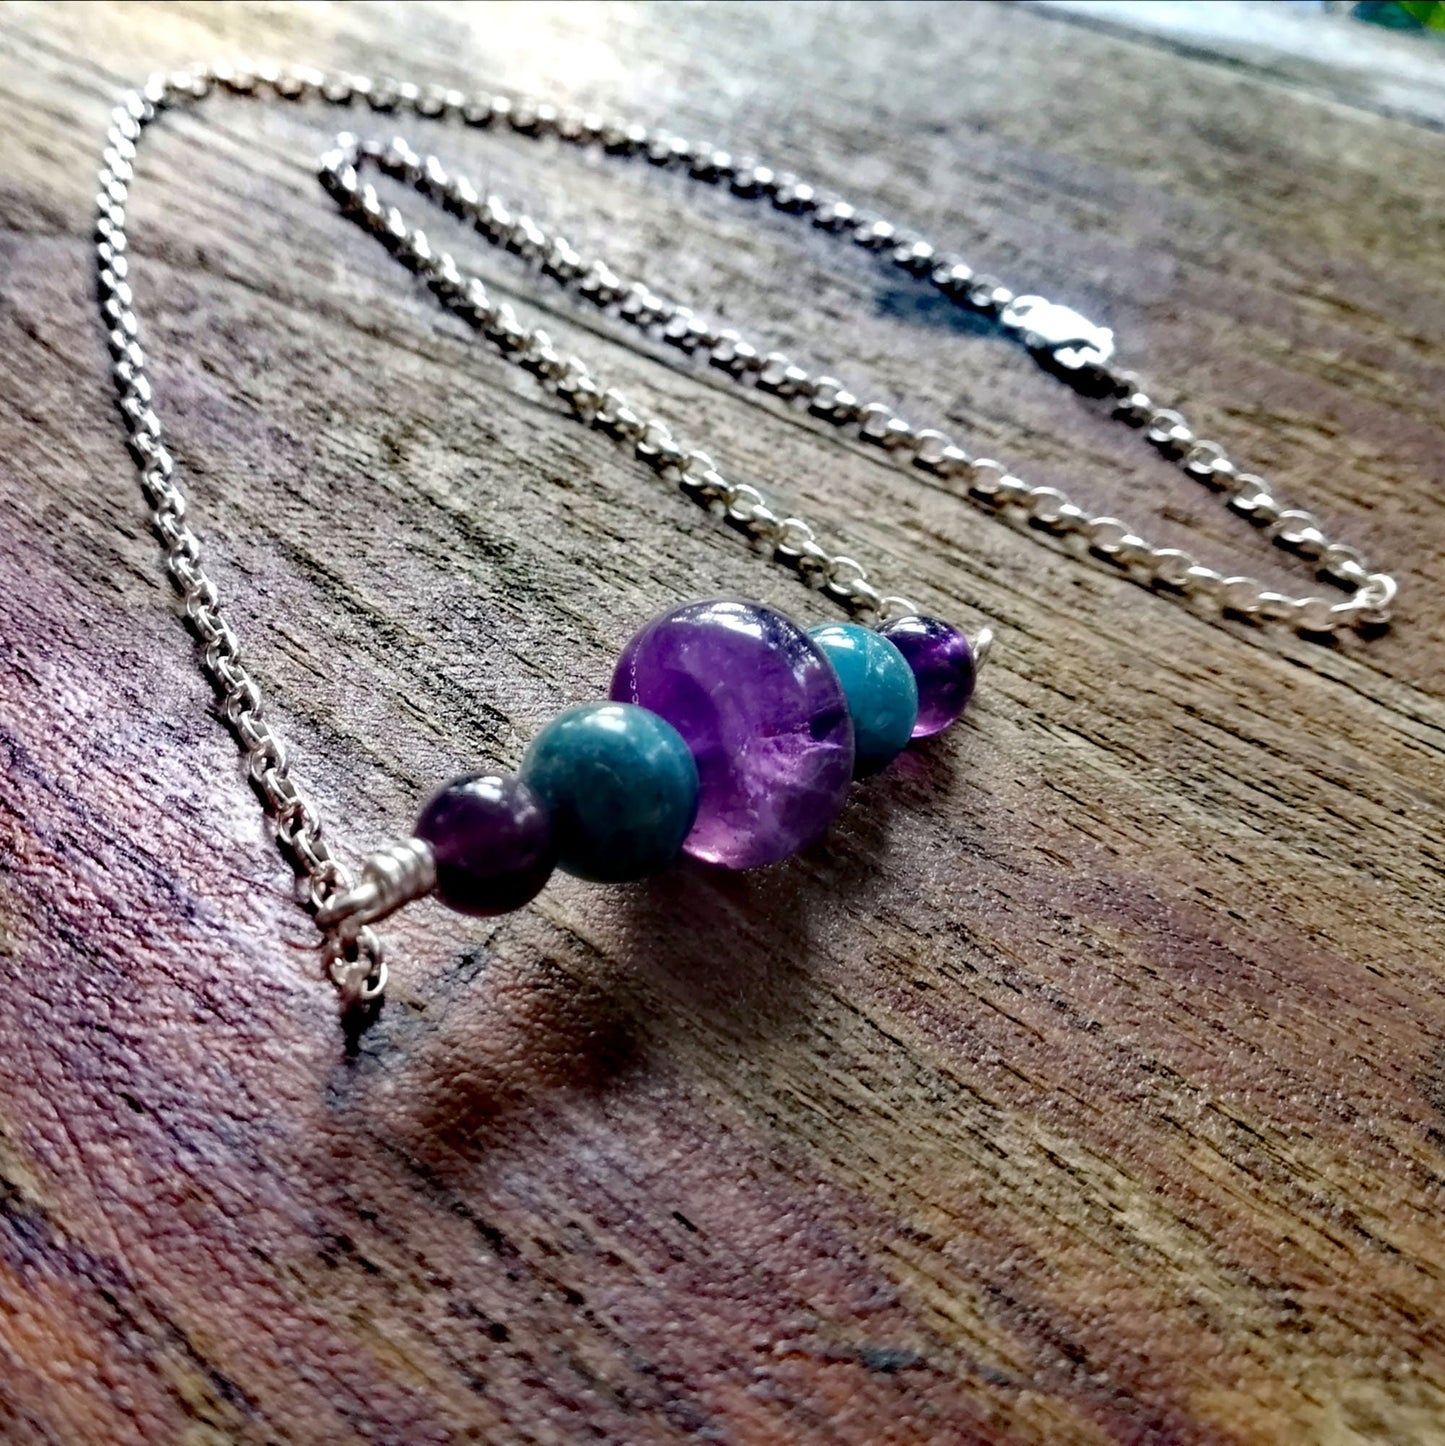 Amethyst and Apatite Necklace - Fifth and Sixth Chakras - Know yourself as you speak your truth!